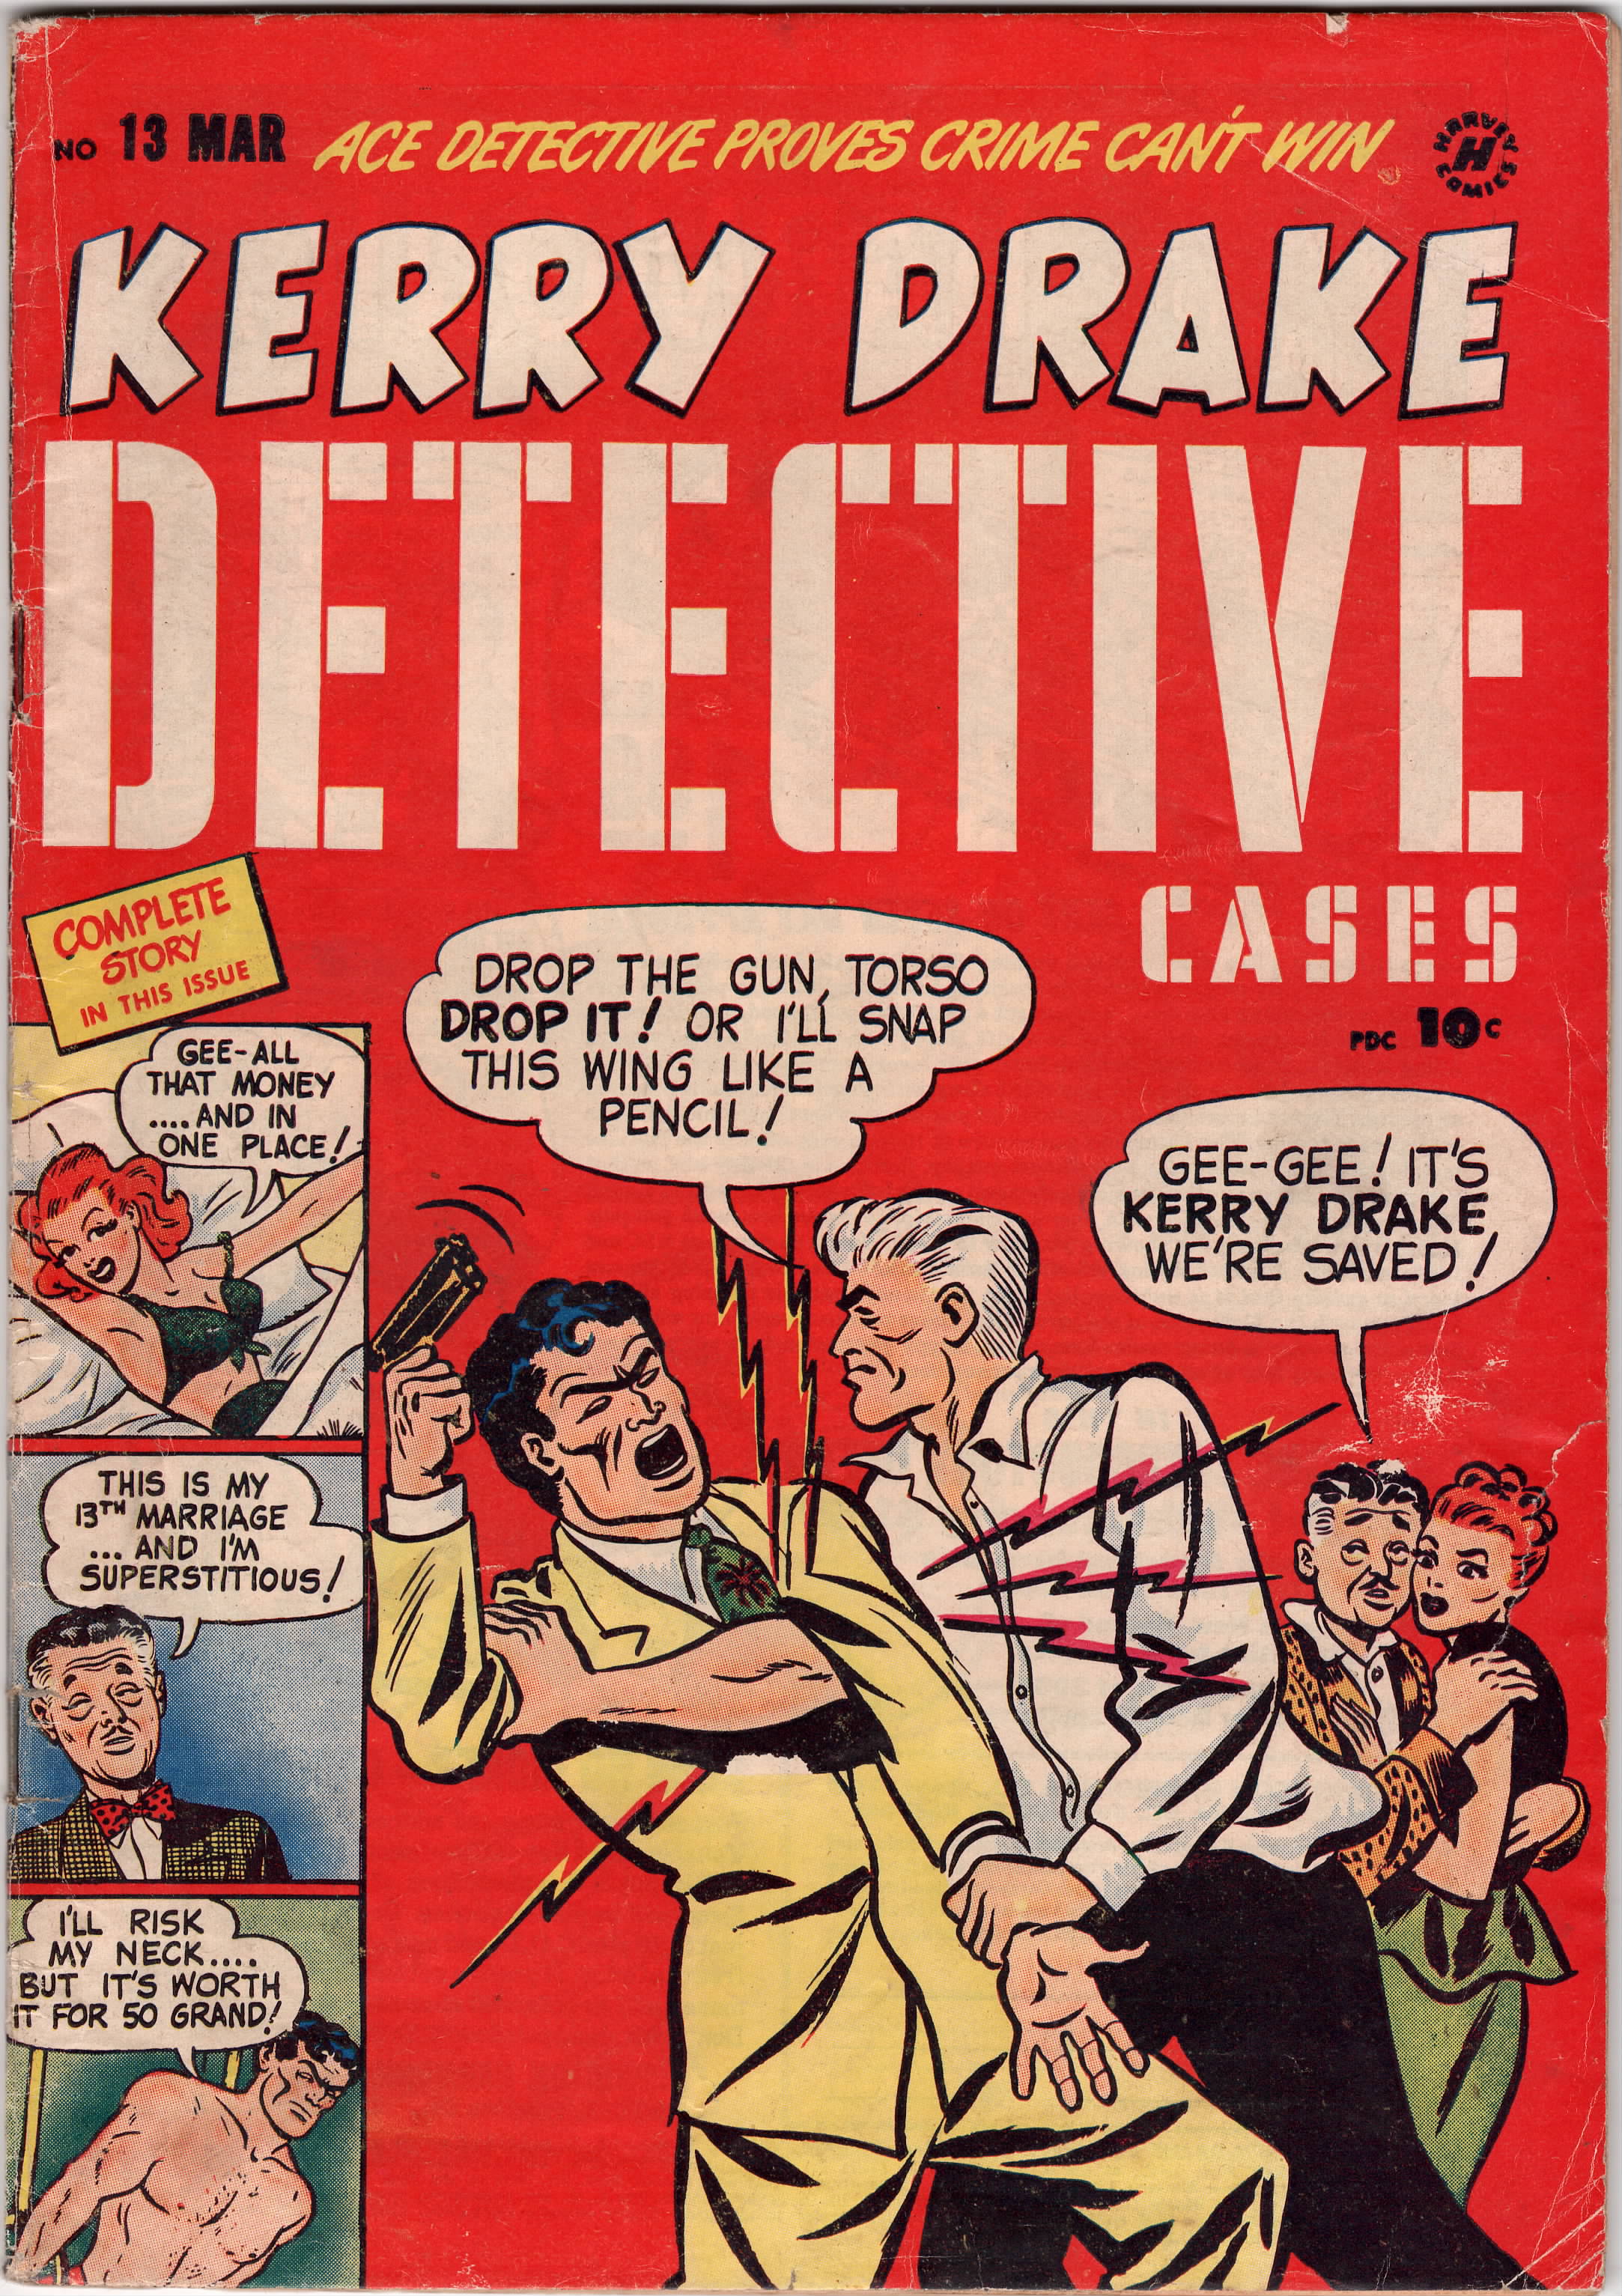 Kerry Drake Detective Cases #13